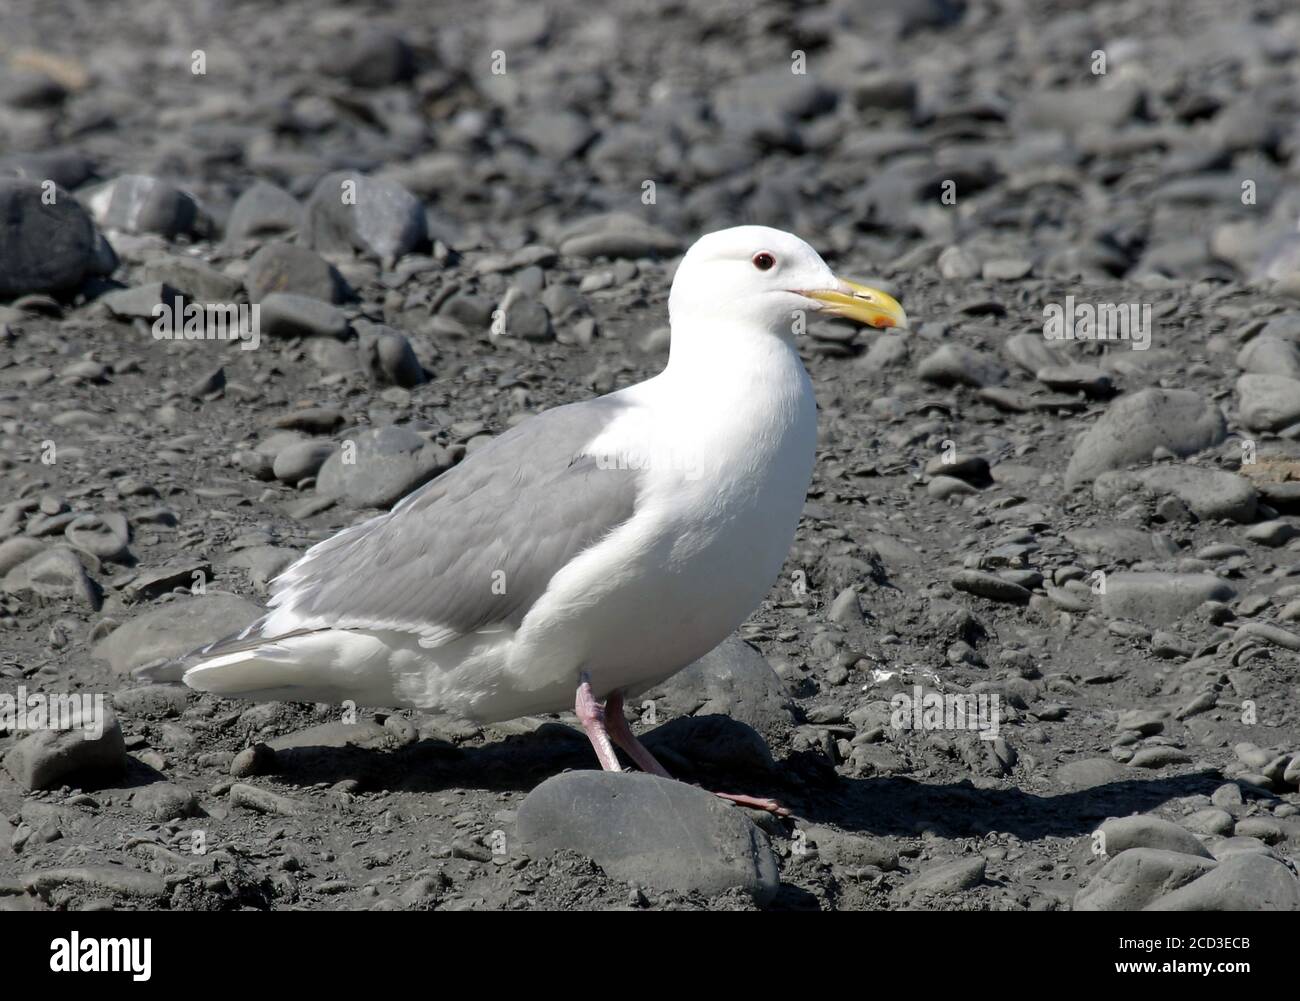 glaucous-winged gull (Larus glaucescens), perching on a bank of pebbles along the coast, side view, USA, Alaska Stock Photo